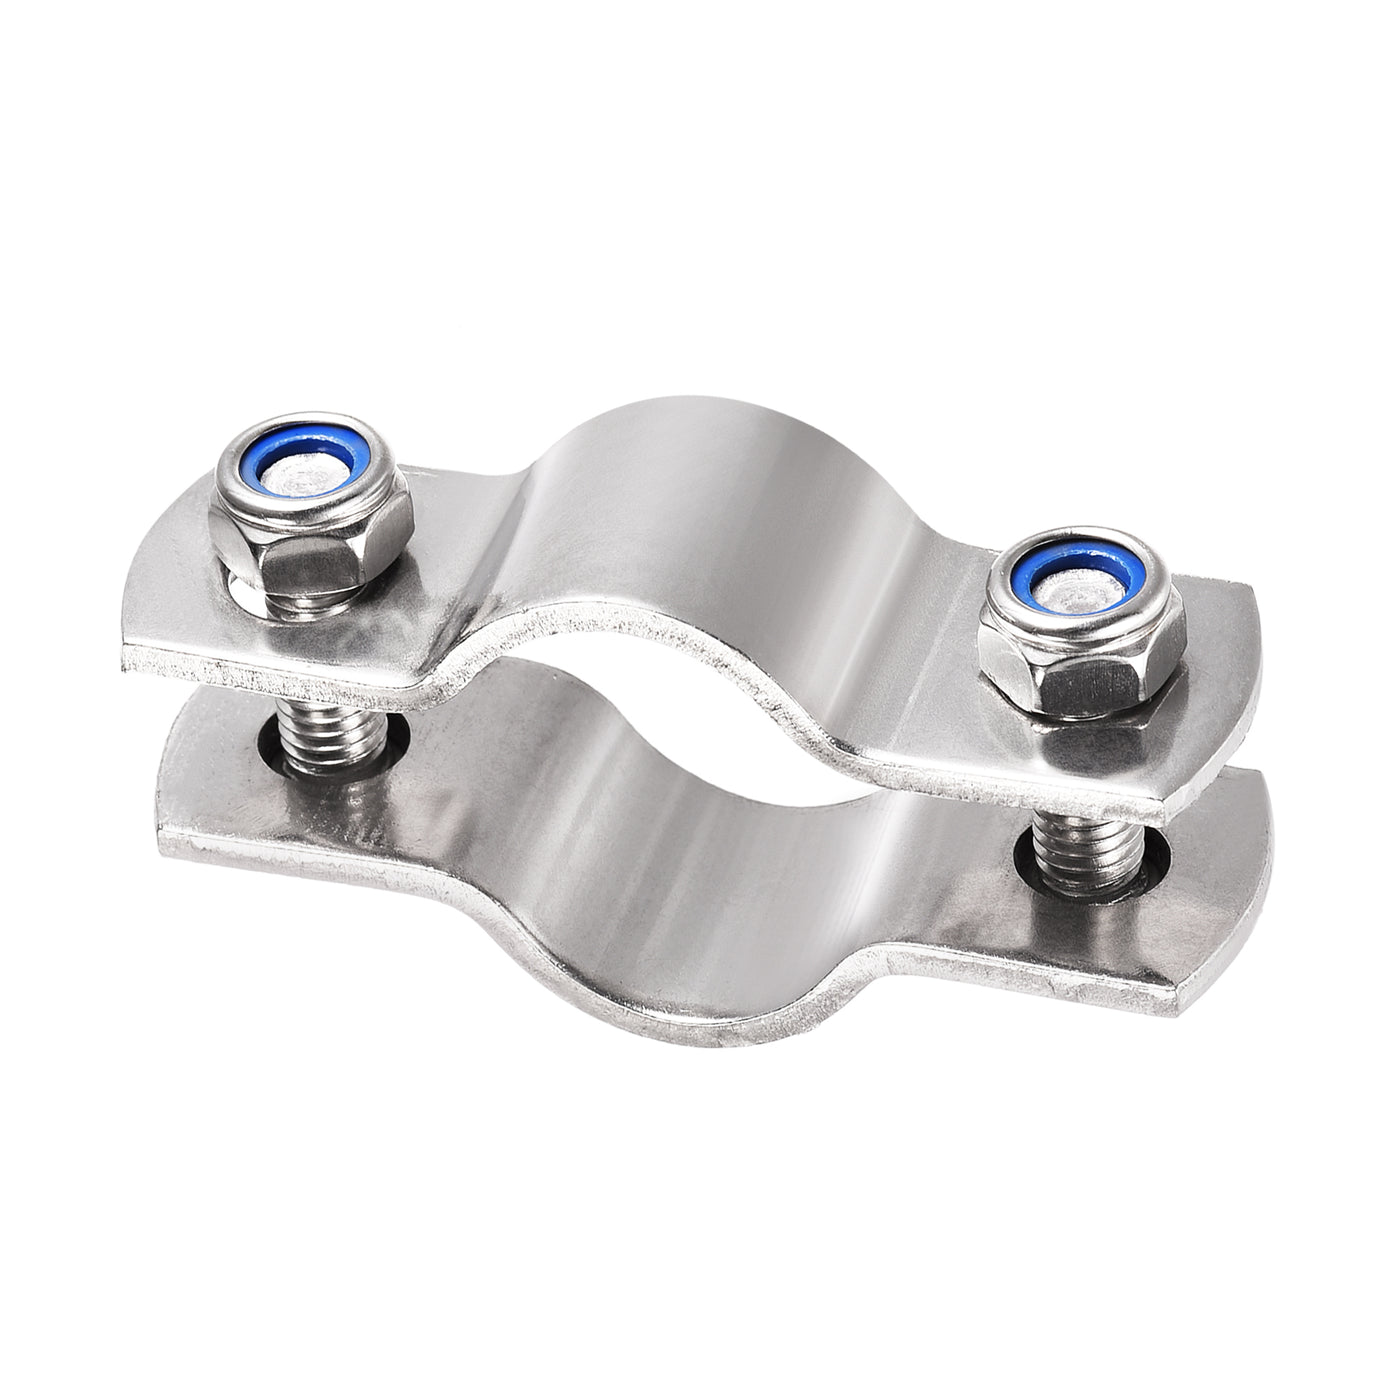 Uxcell Uxcell Wall Mount Ceiling Mount Pipe Support, 304 Stainless Steel Pipe Bracket Clamp for 58mm Pipe 2pcs